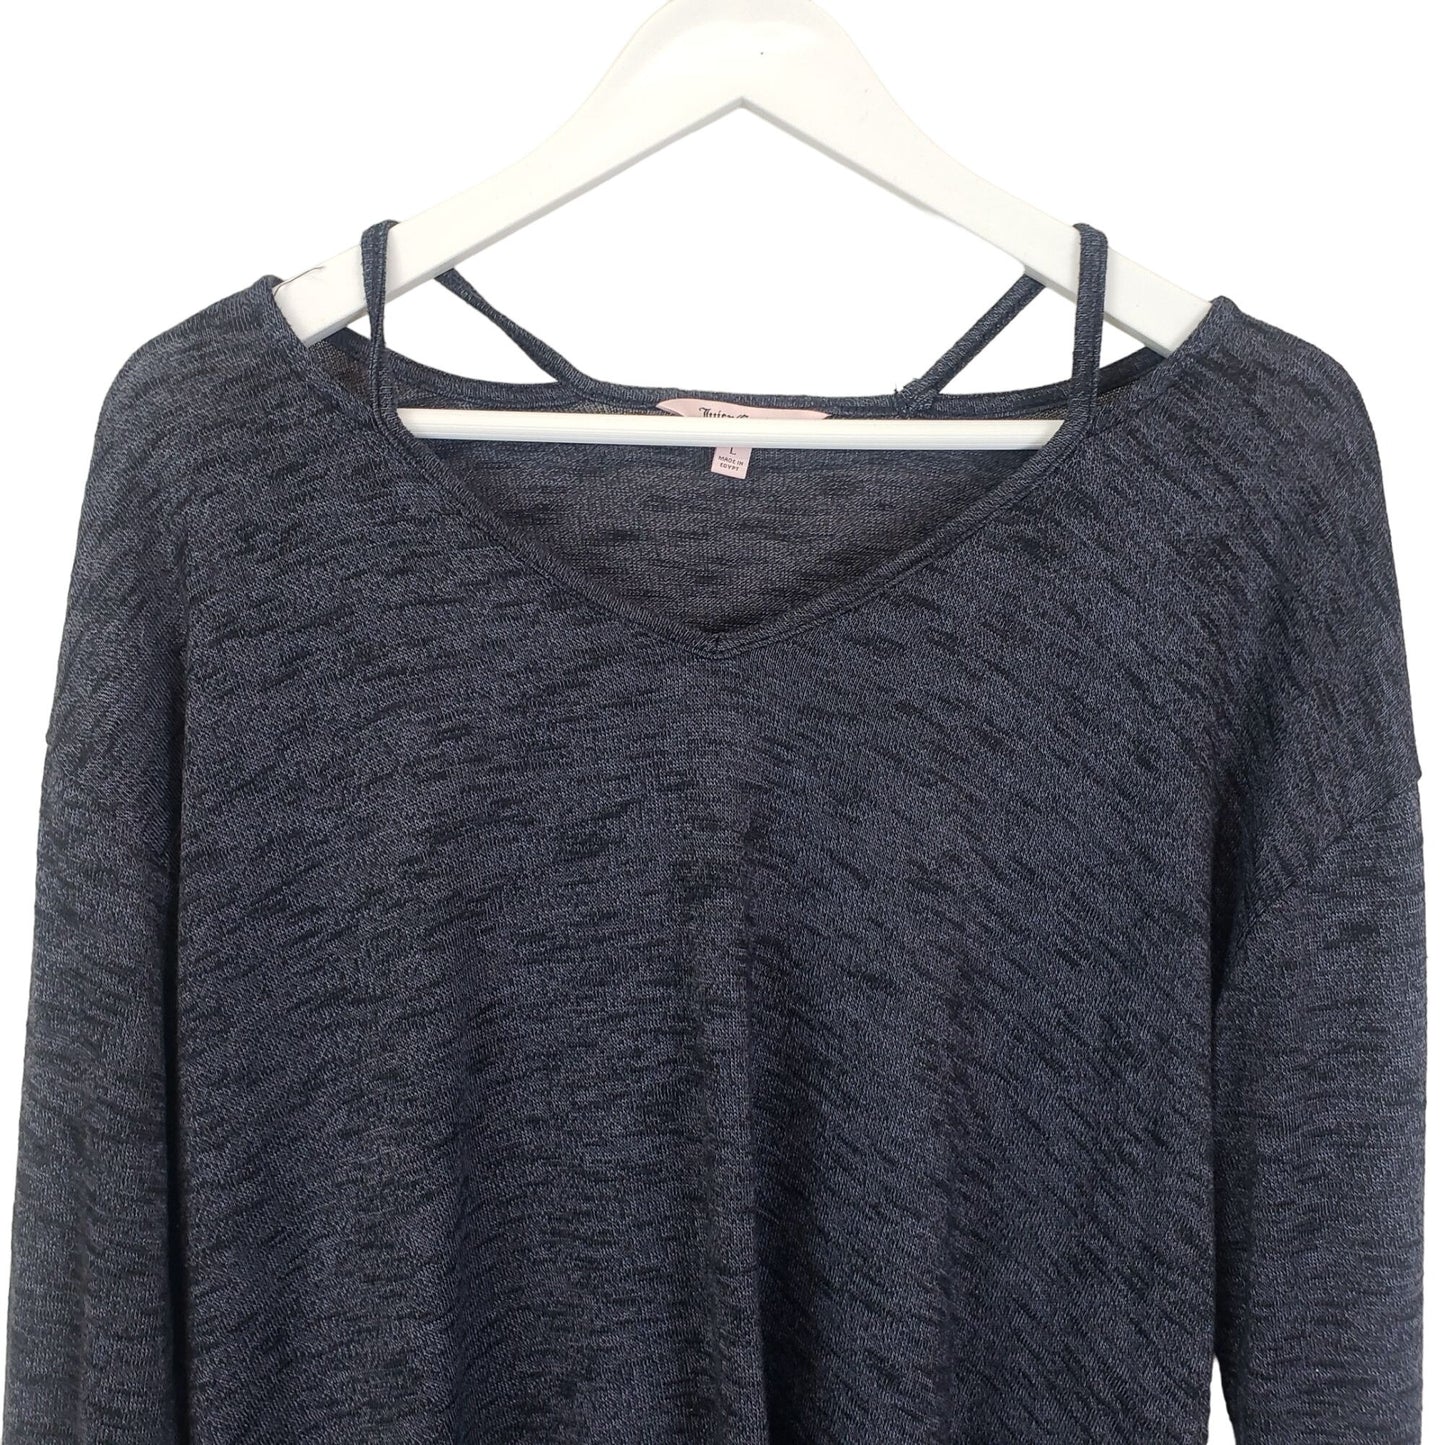 Juicy Couture Hi-Style Heather Gray Top Size Large